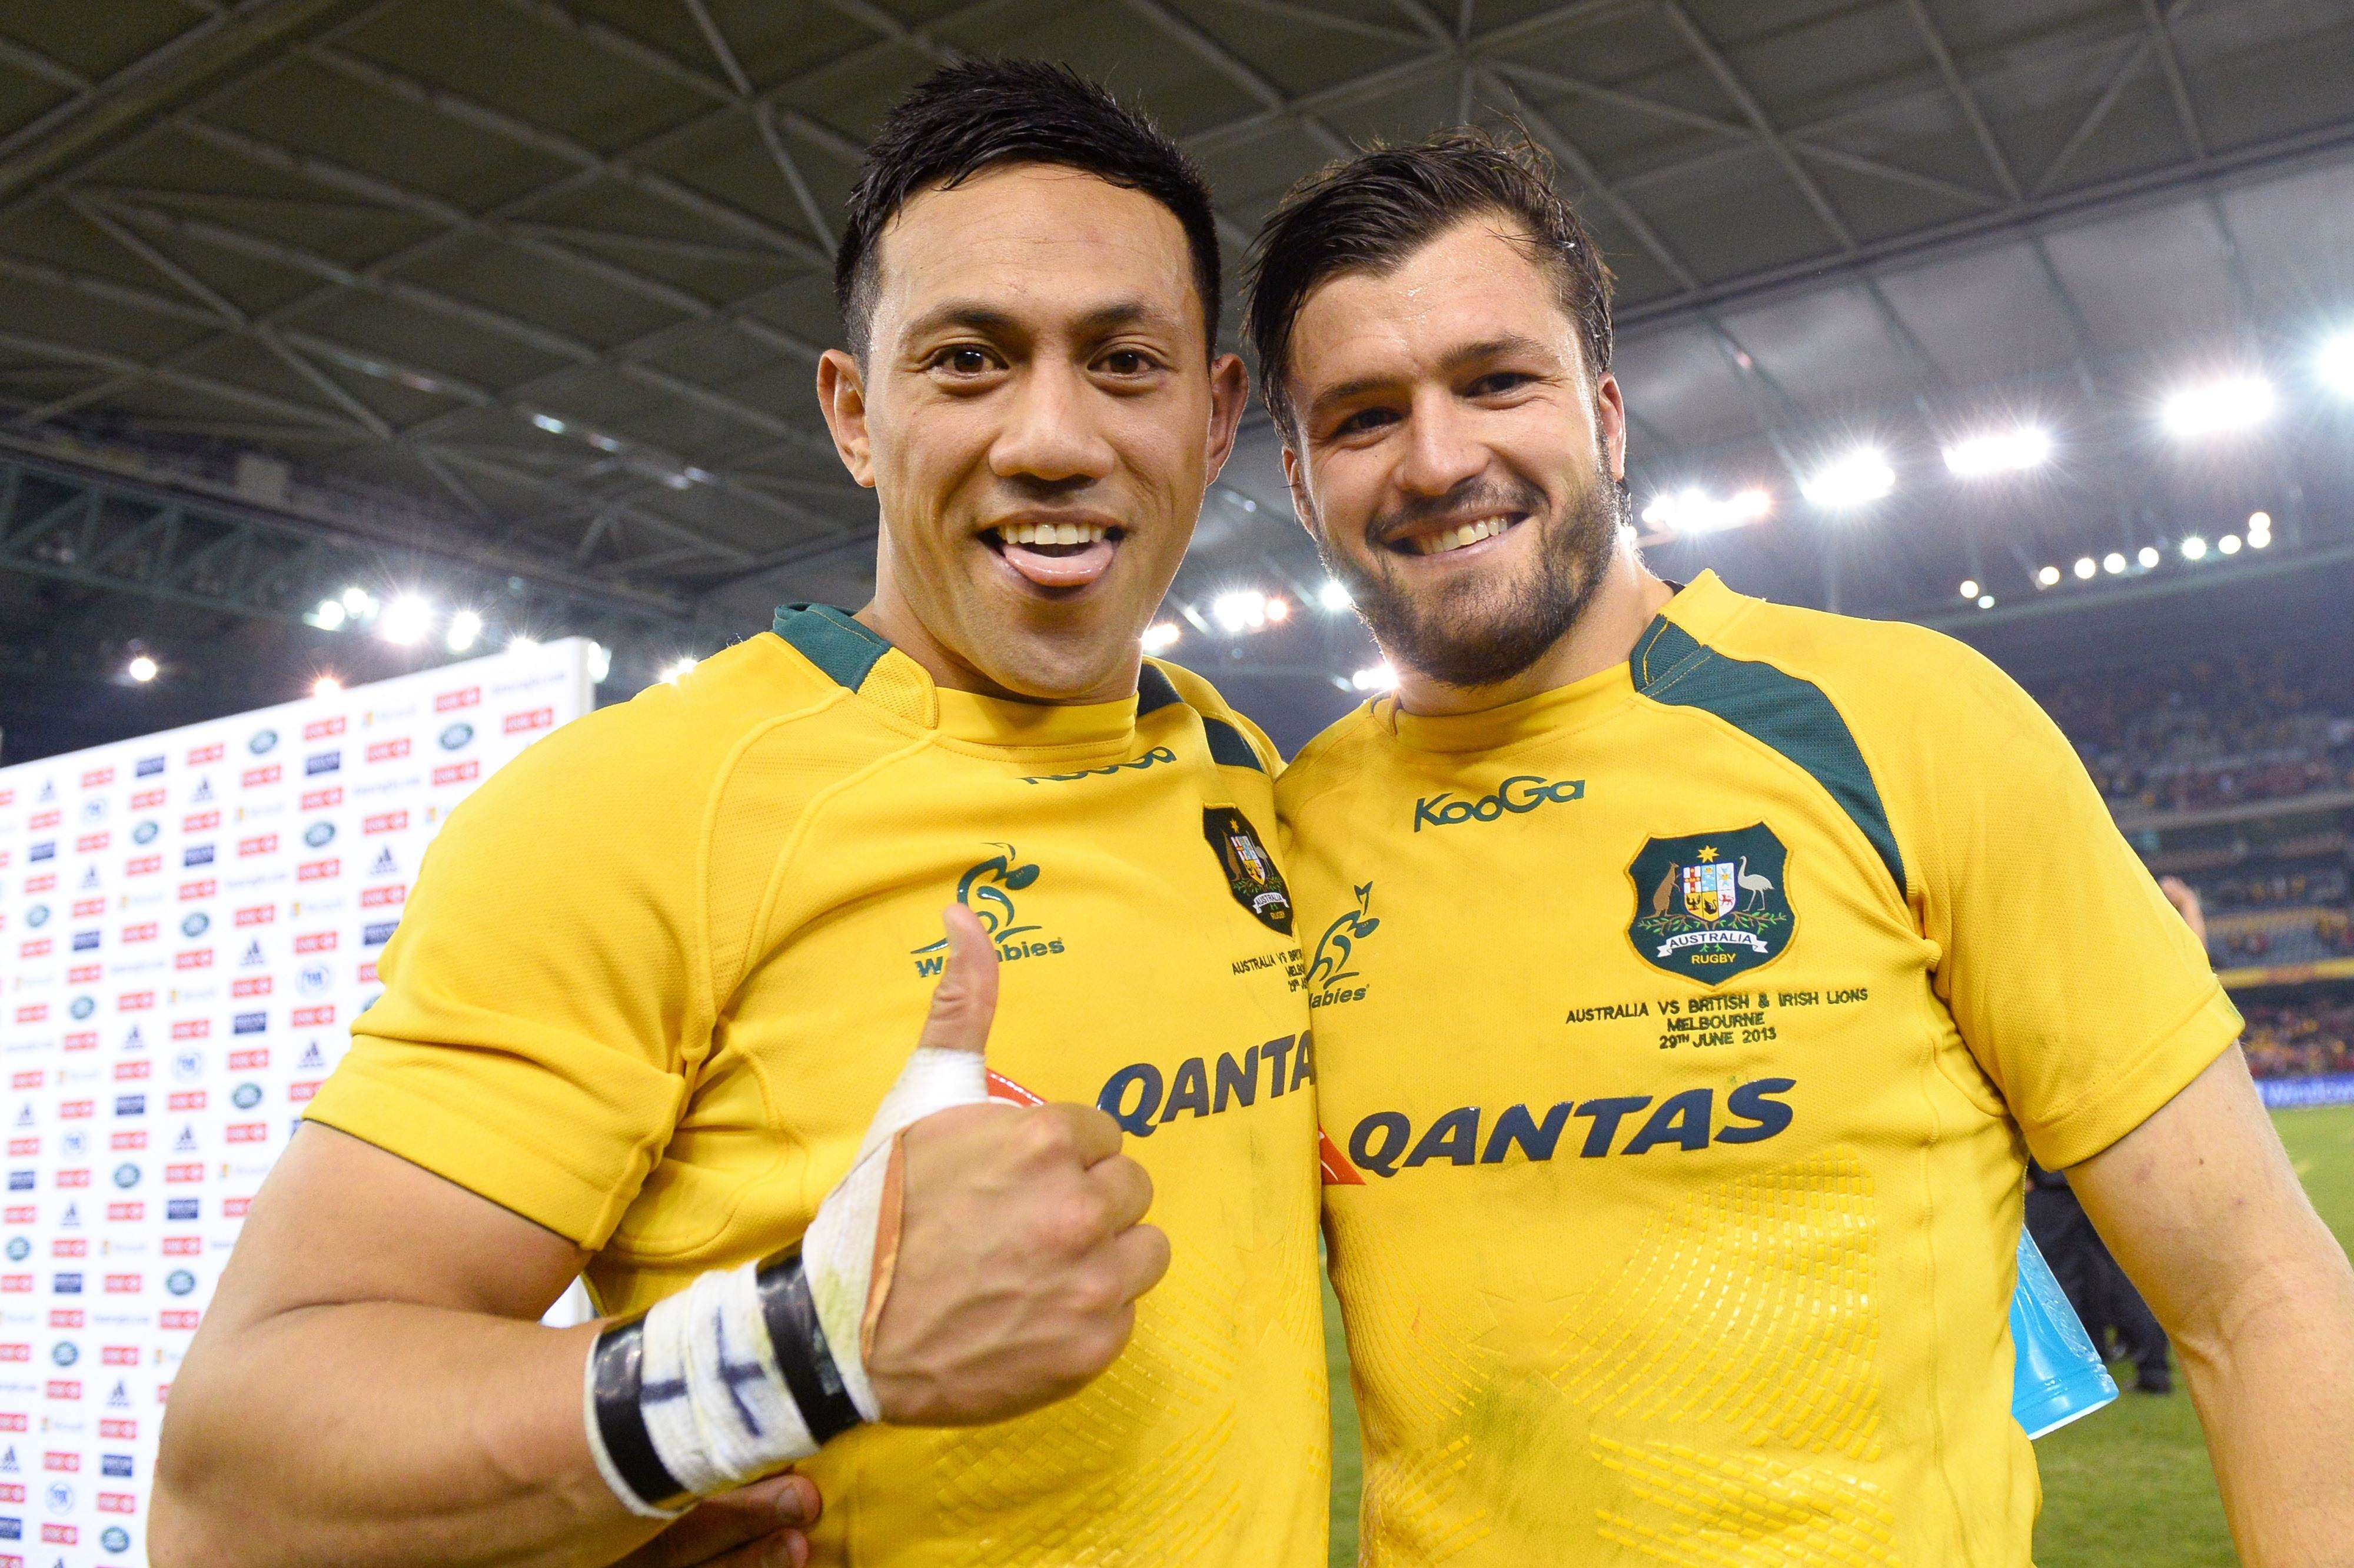 Christian Leali'iano (left) celebrates with team-mate Adam Ashley-Cooper after the Wallabies beat the British & Irish Lions in Melbourne in 2013. Photo: AFP